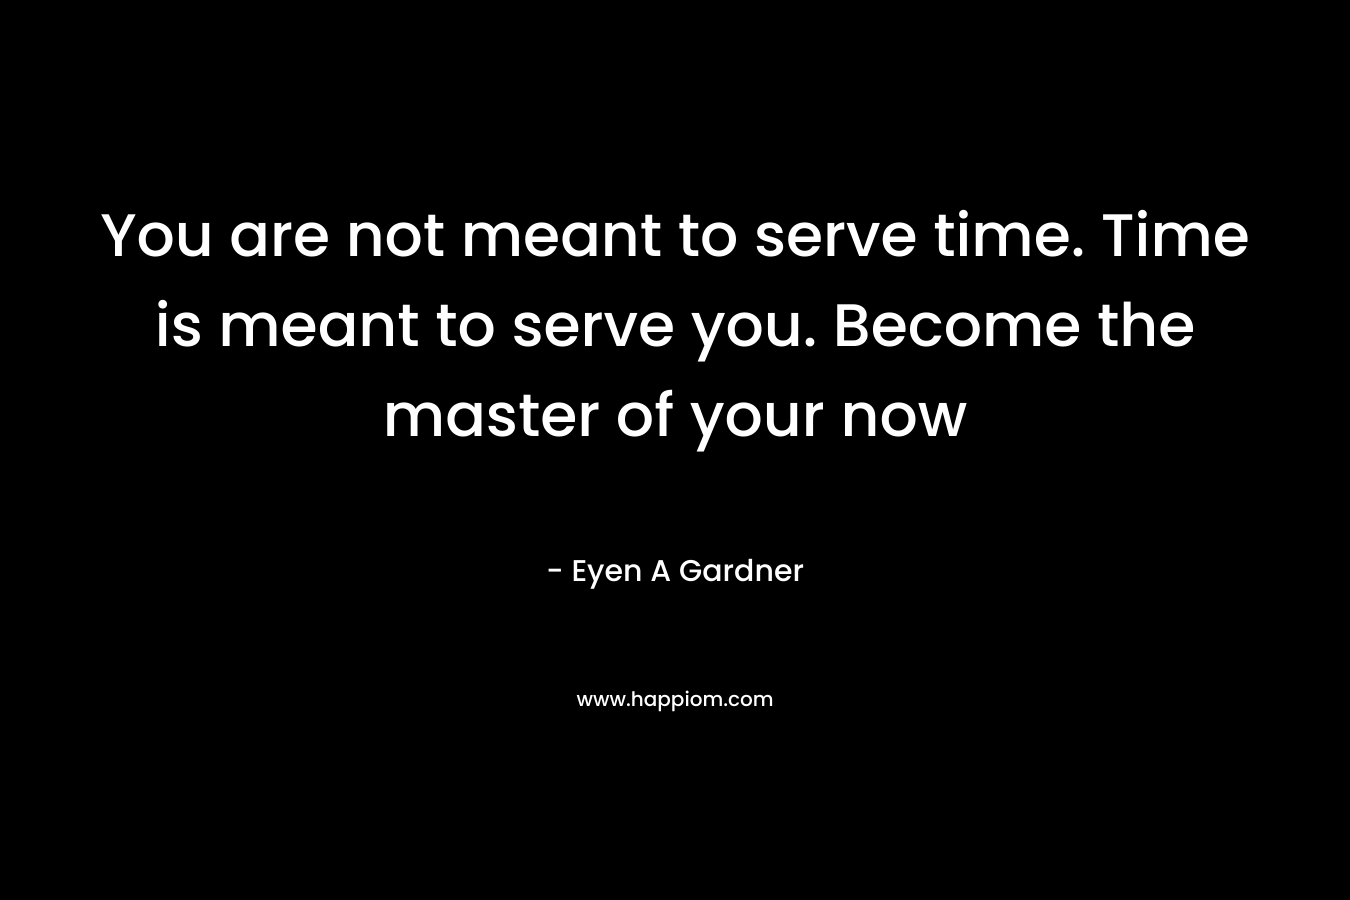 You are not meant to serve time. Time is meant to serve you. Become the master of your now